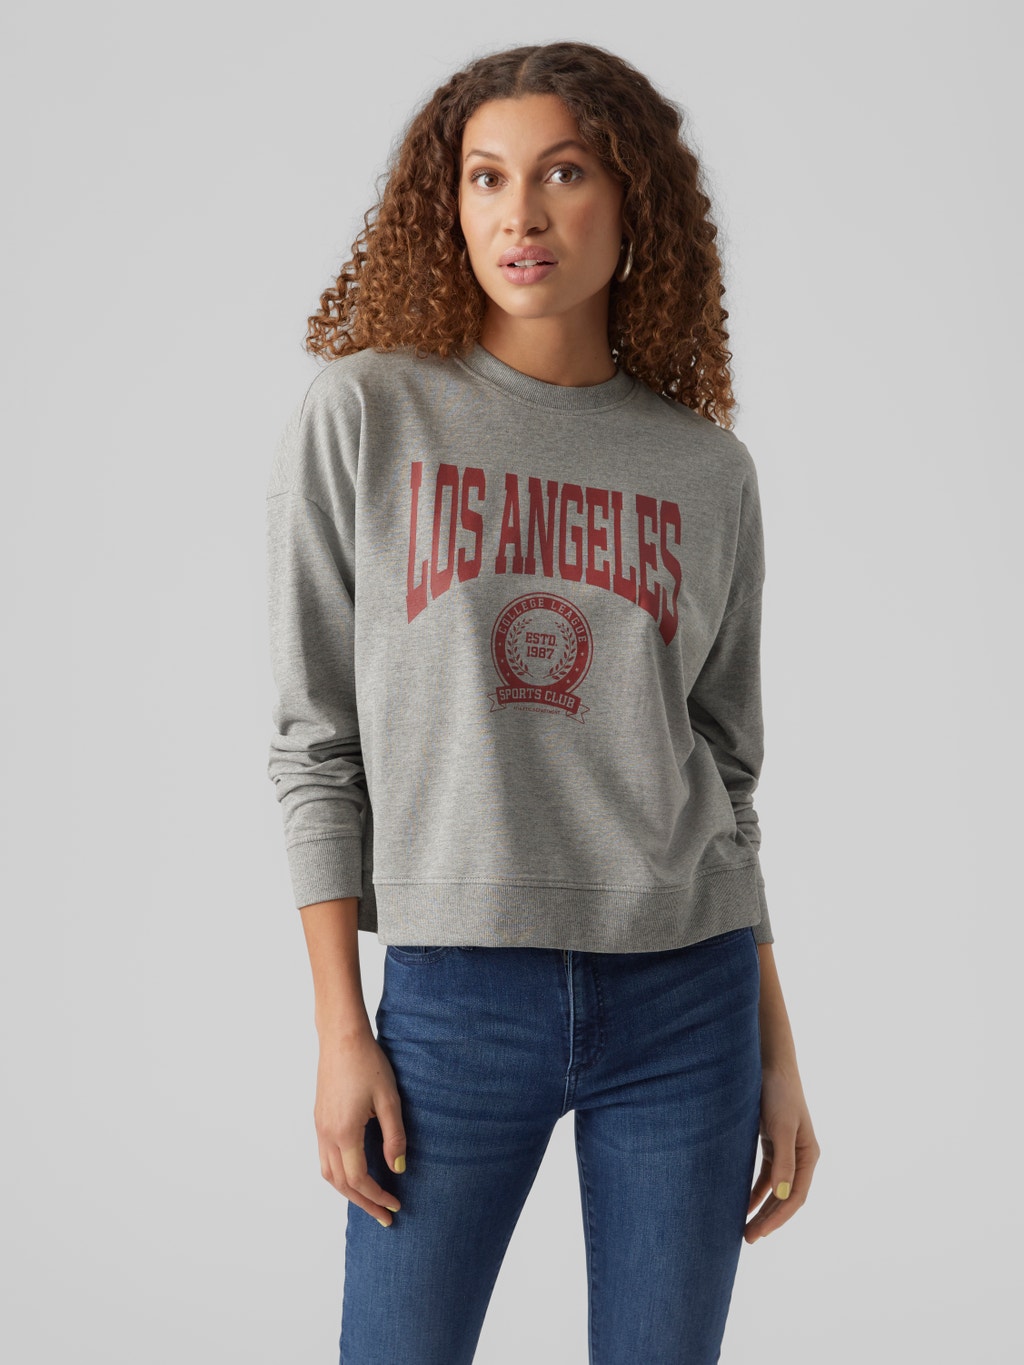 Oversize Fit Ribbed cuffs Sweatshirt with 30% discount! Vero Moda®